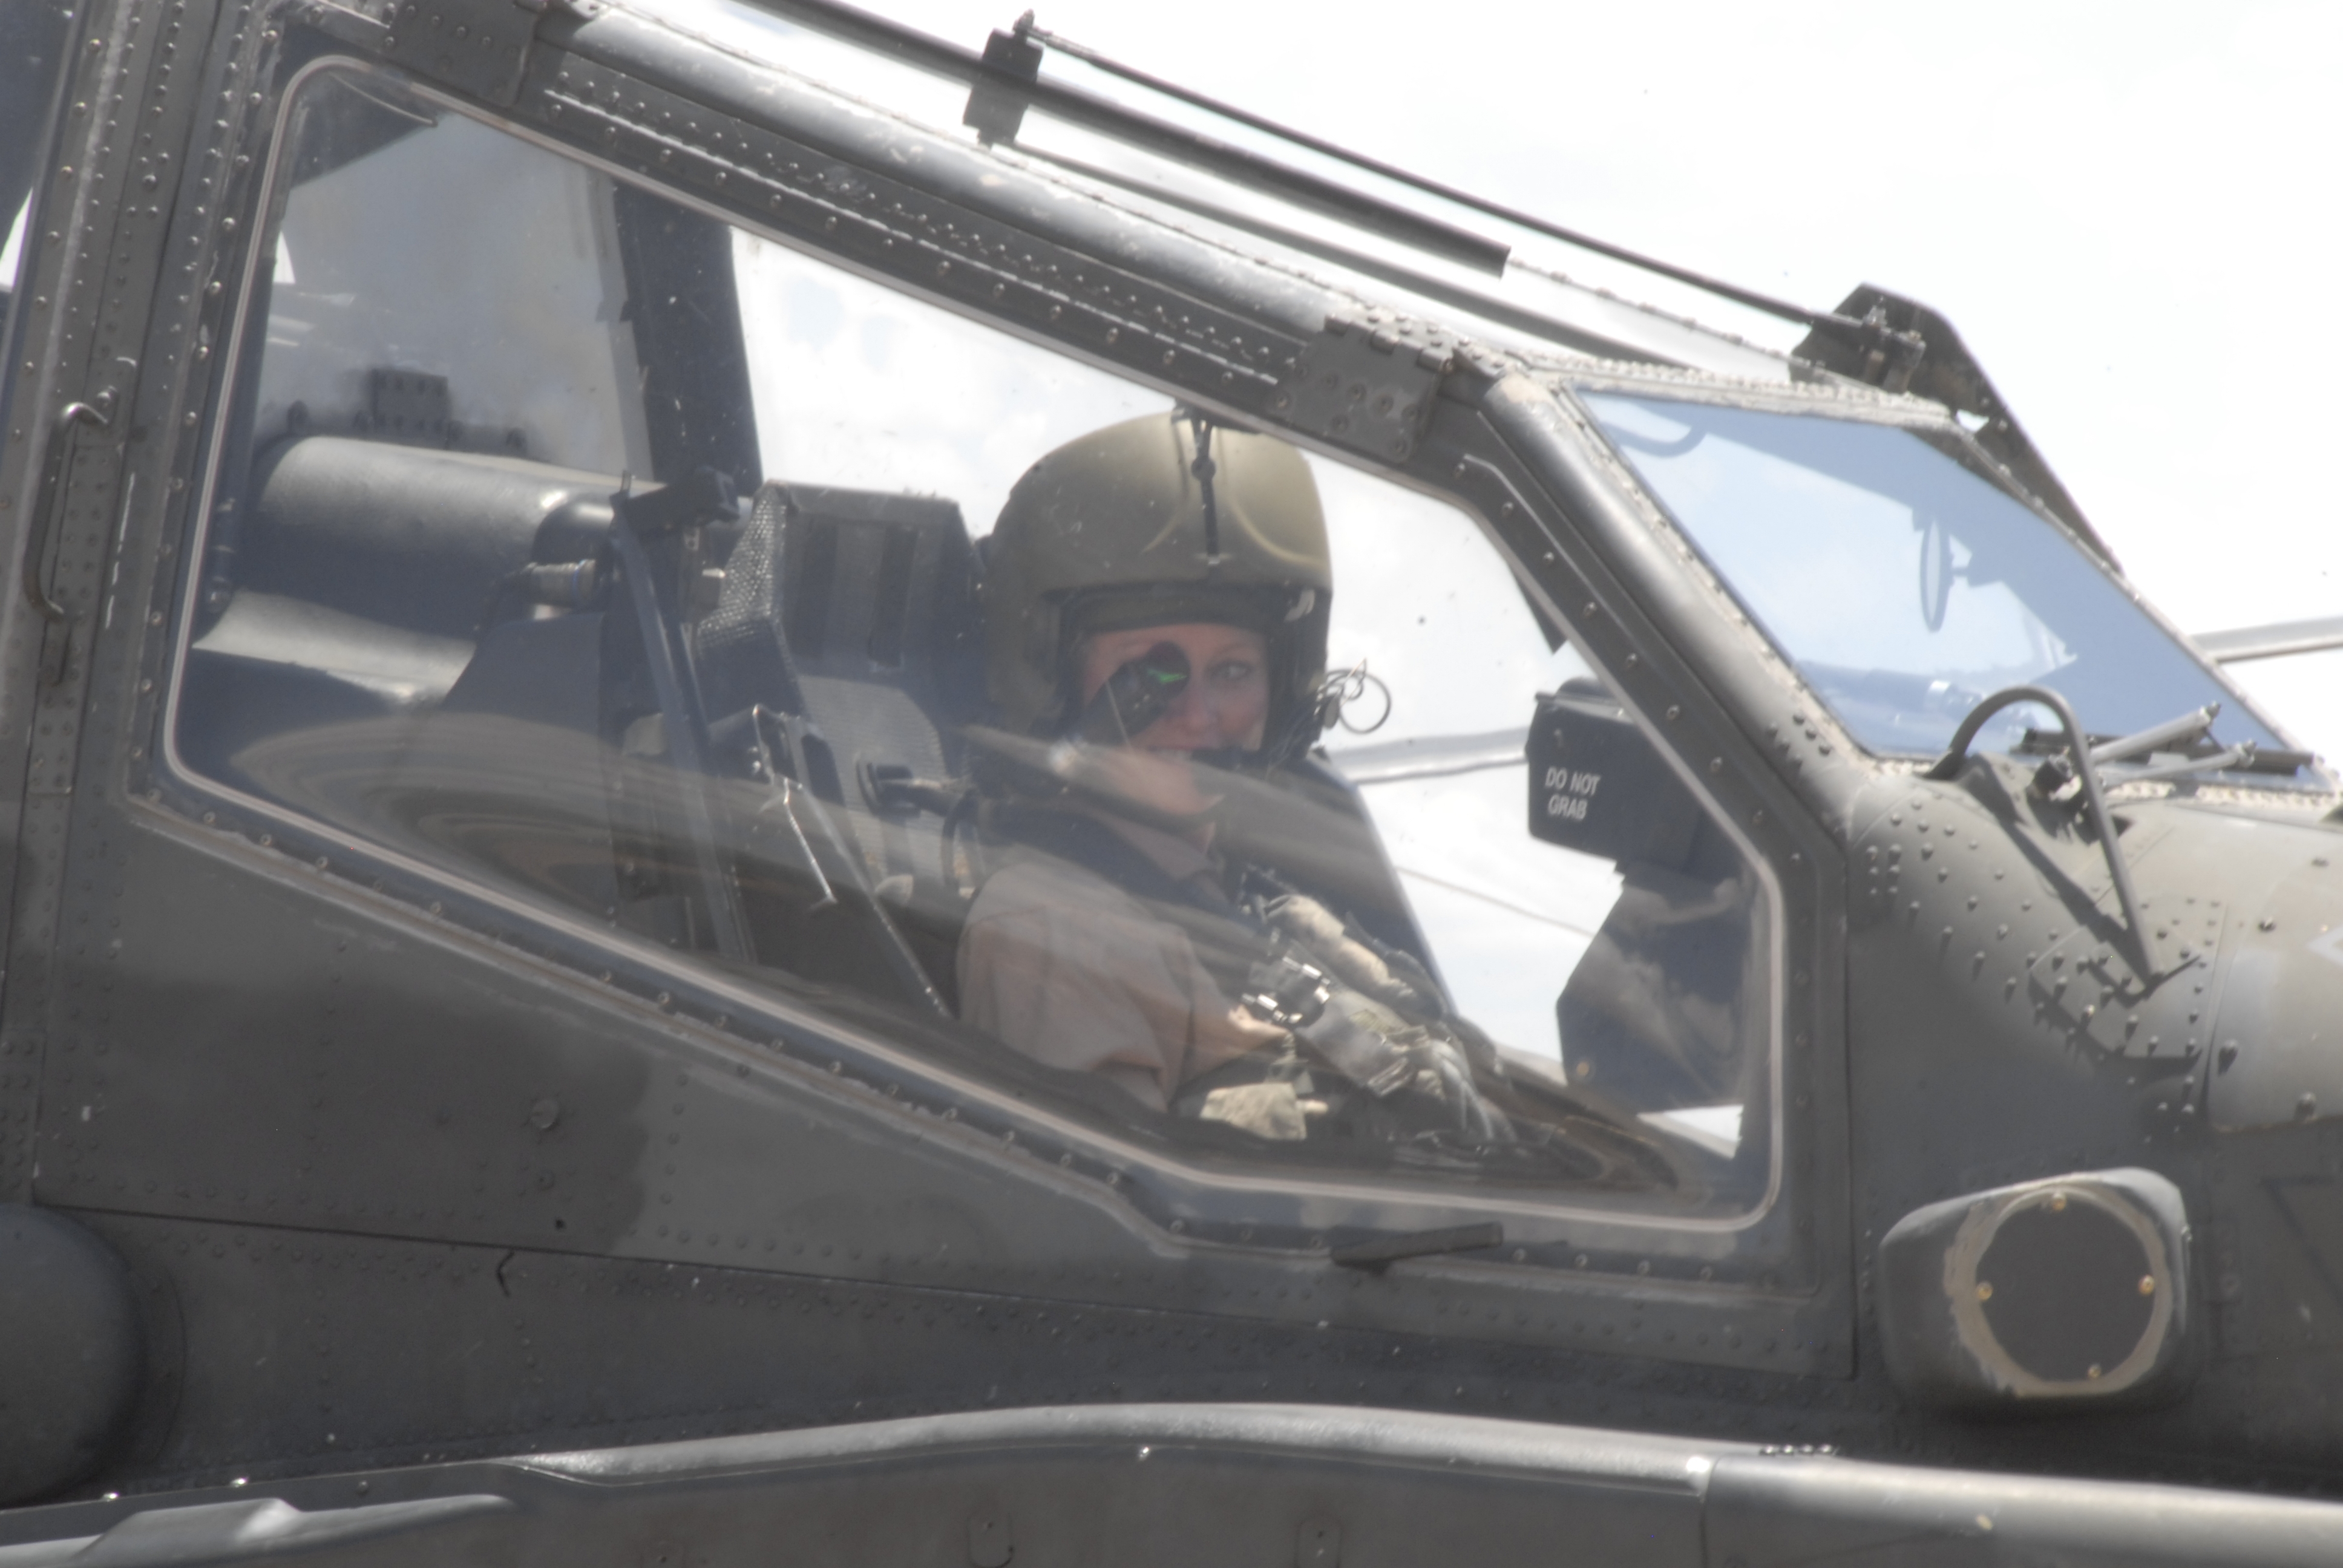 War Reporter Alex Quade rides along in the front seat of an Apache helicopter, with helmet and targeting monocle, to learn about 